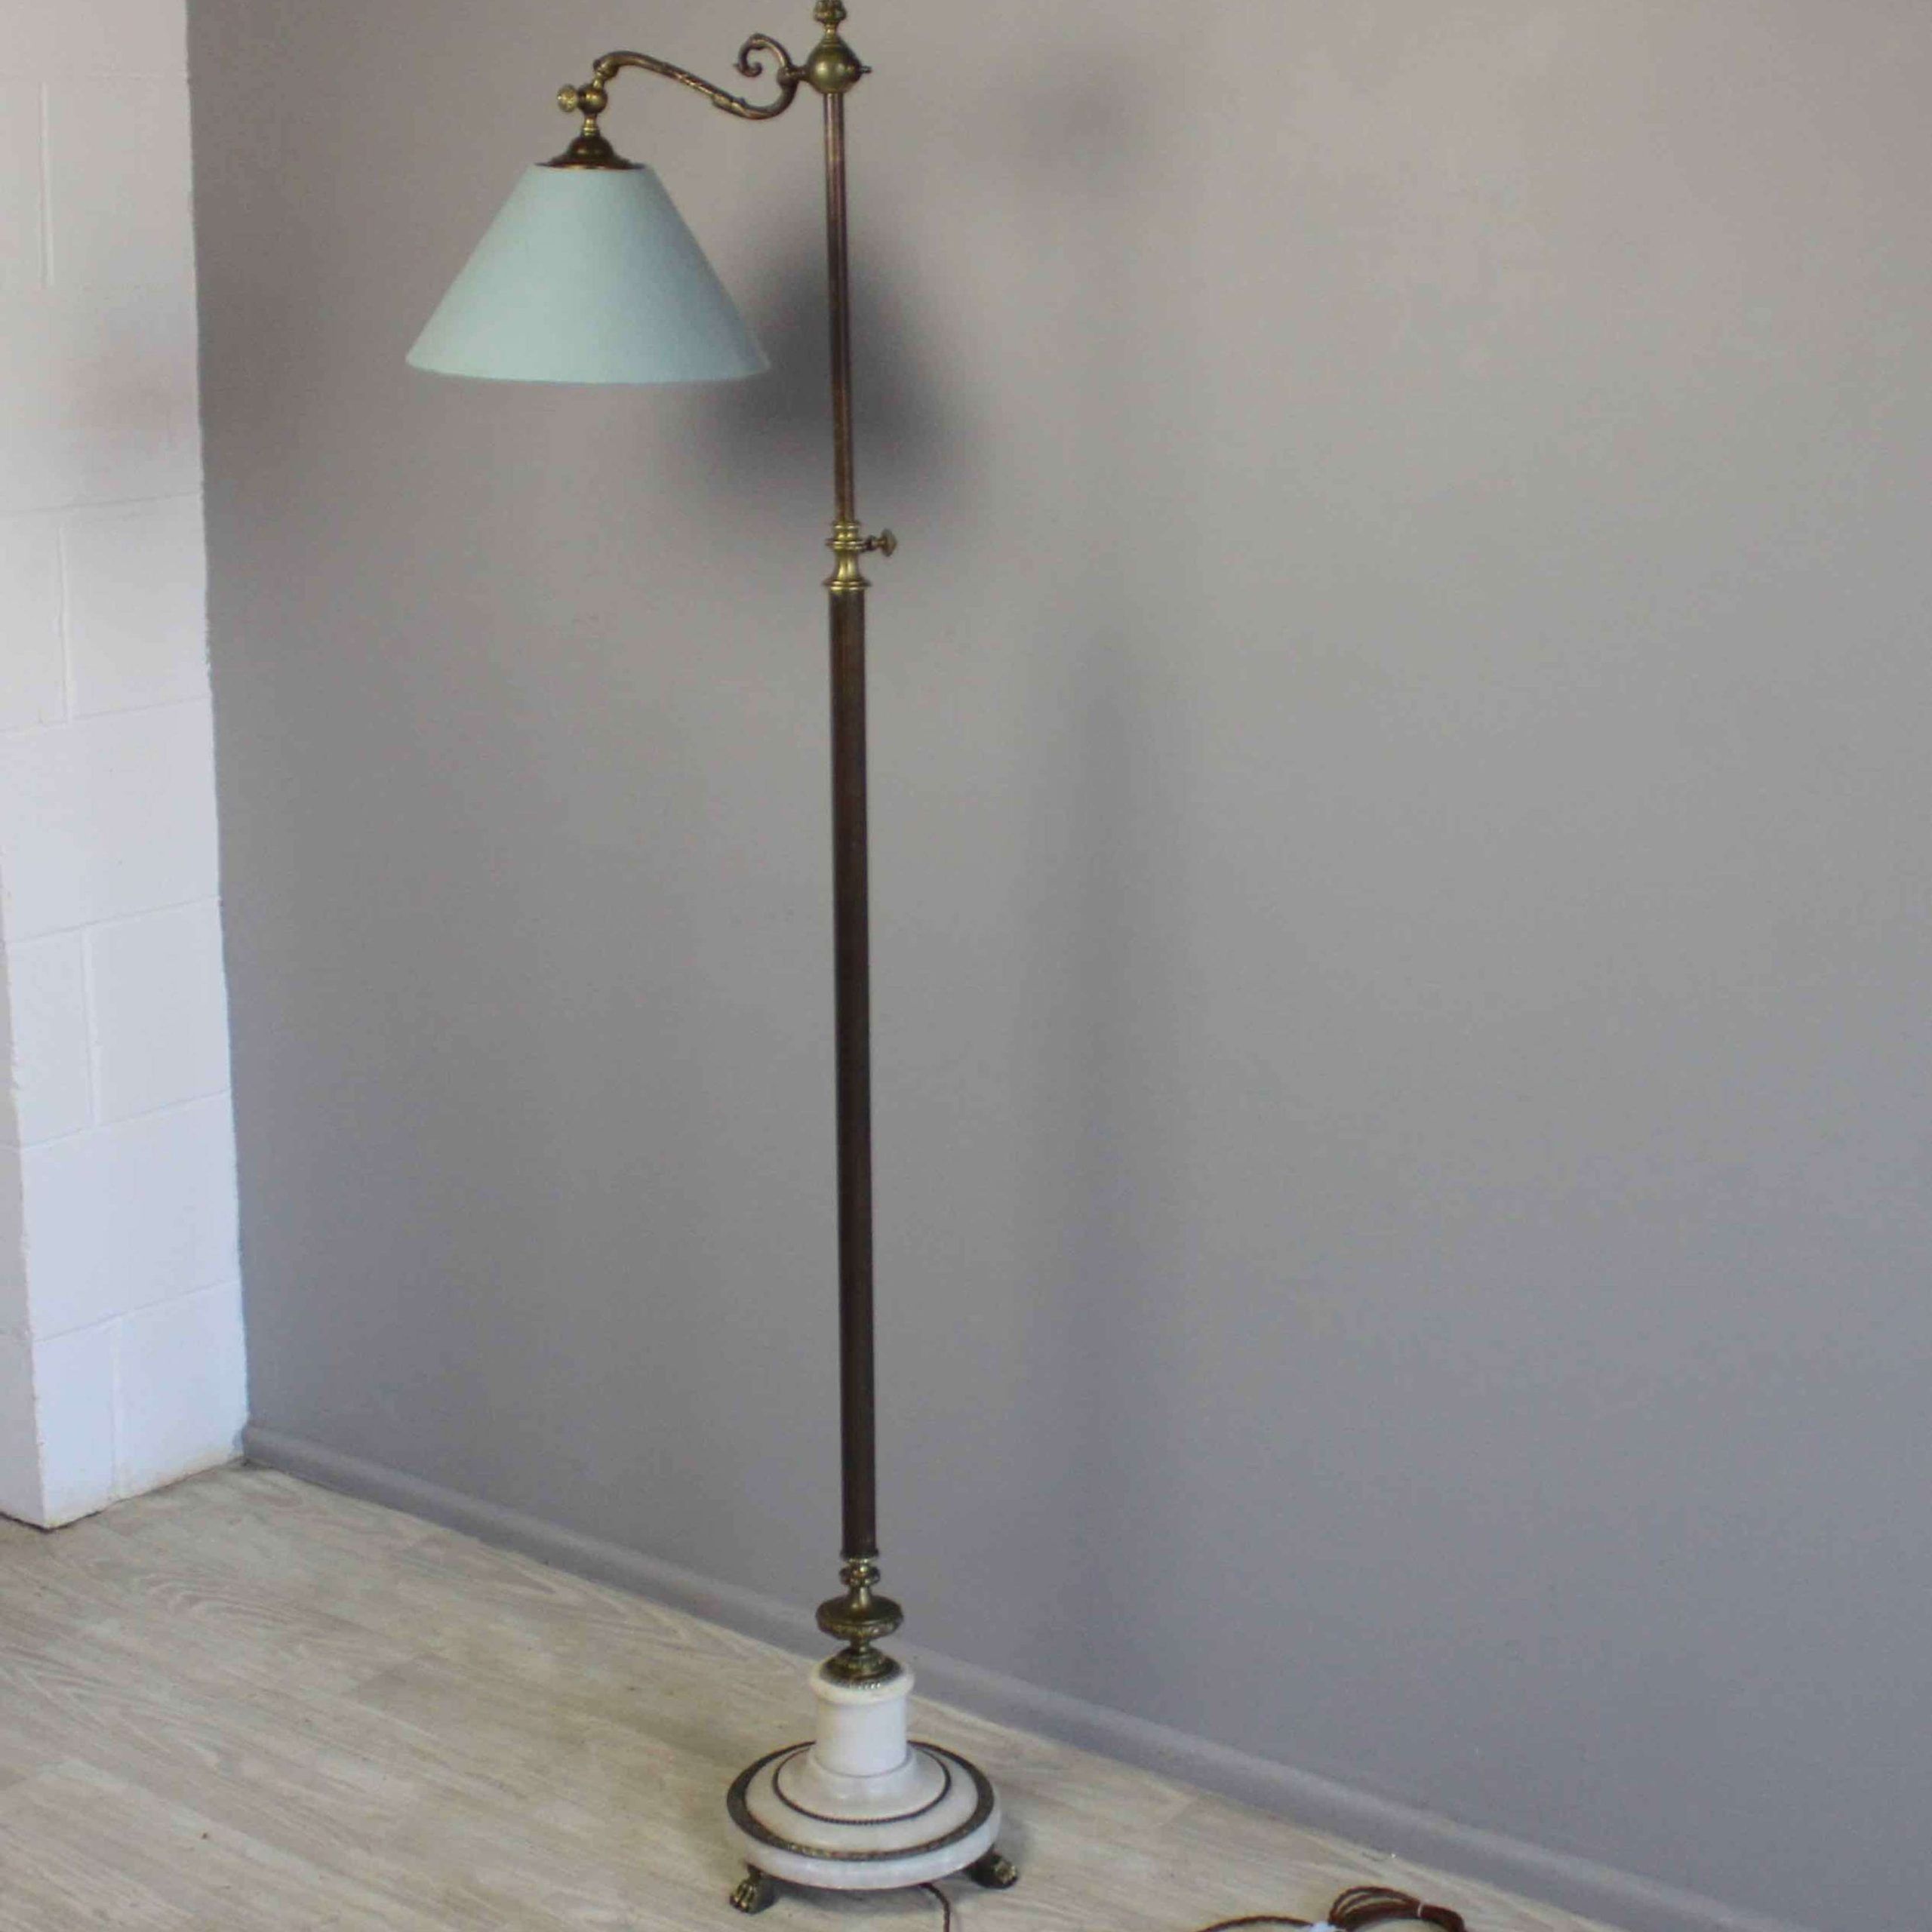 Marble Based Adjustable Height Reading Lamp In Antique Floor Lamps With Adjustable Height Floor Lamps (View 4 of 15)